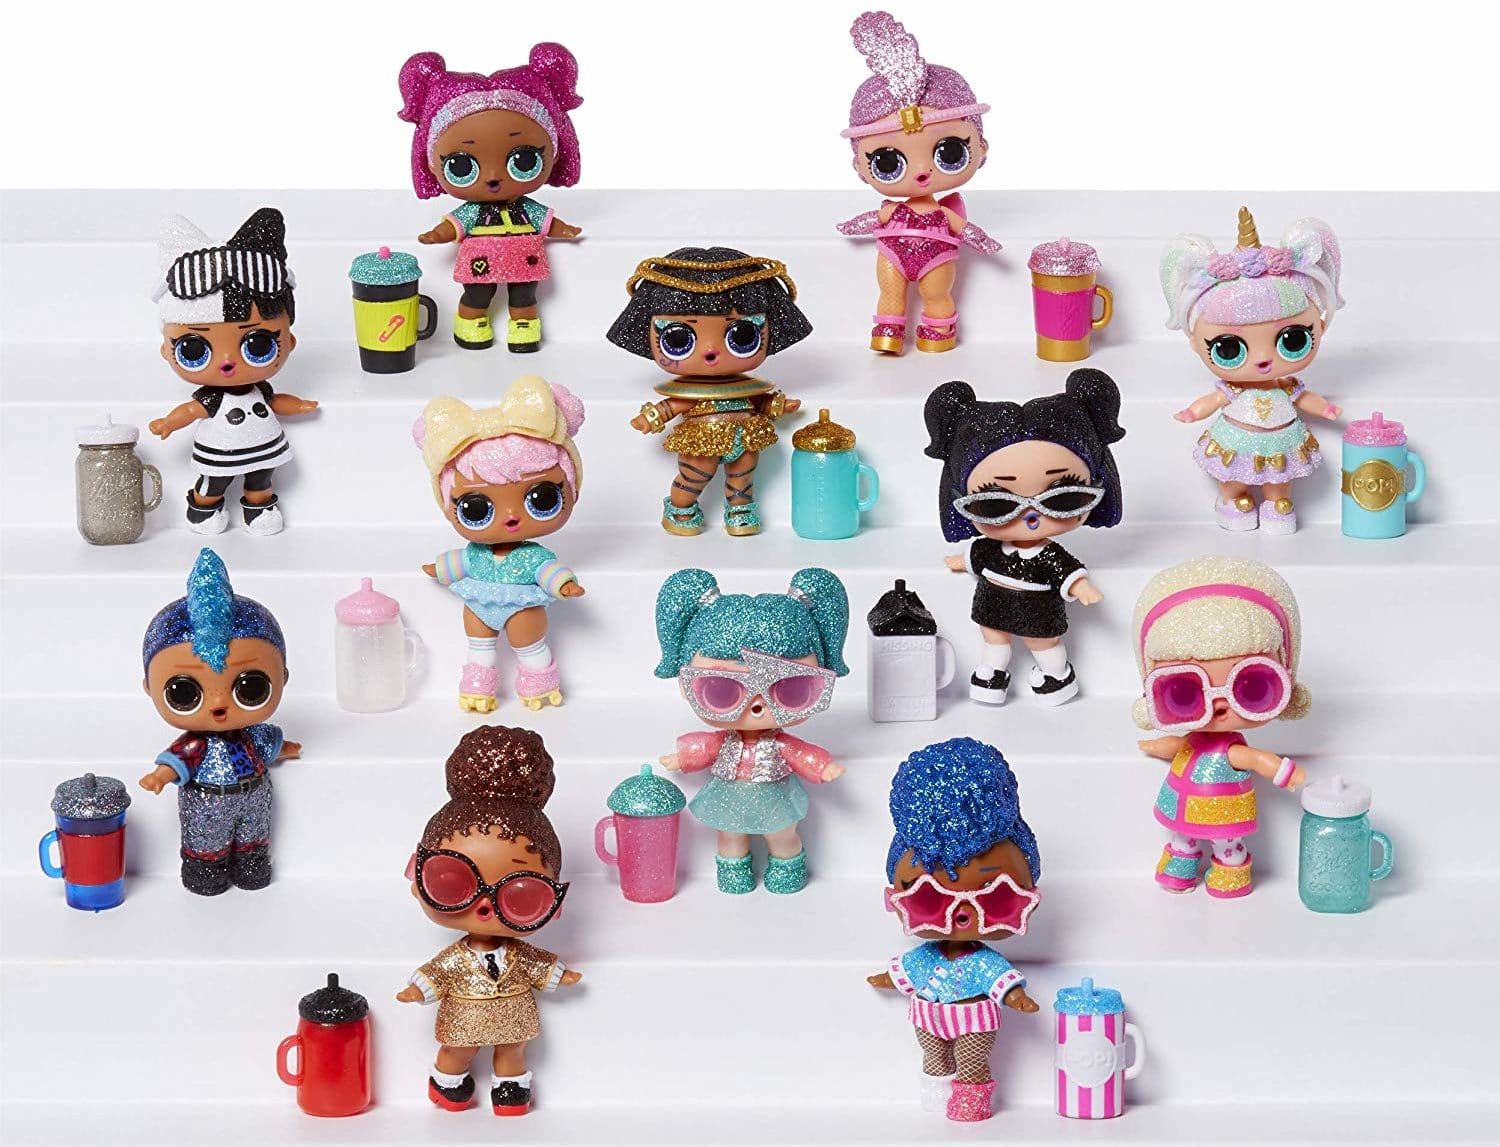 All 12 Sparkle Series Dolls - What Do They Look Like